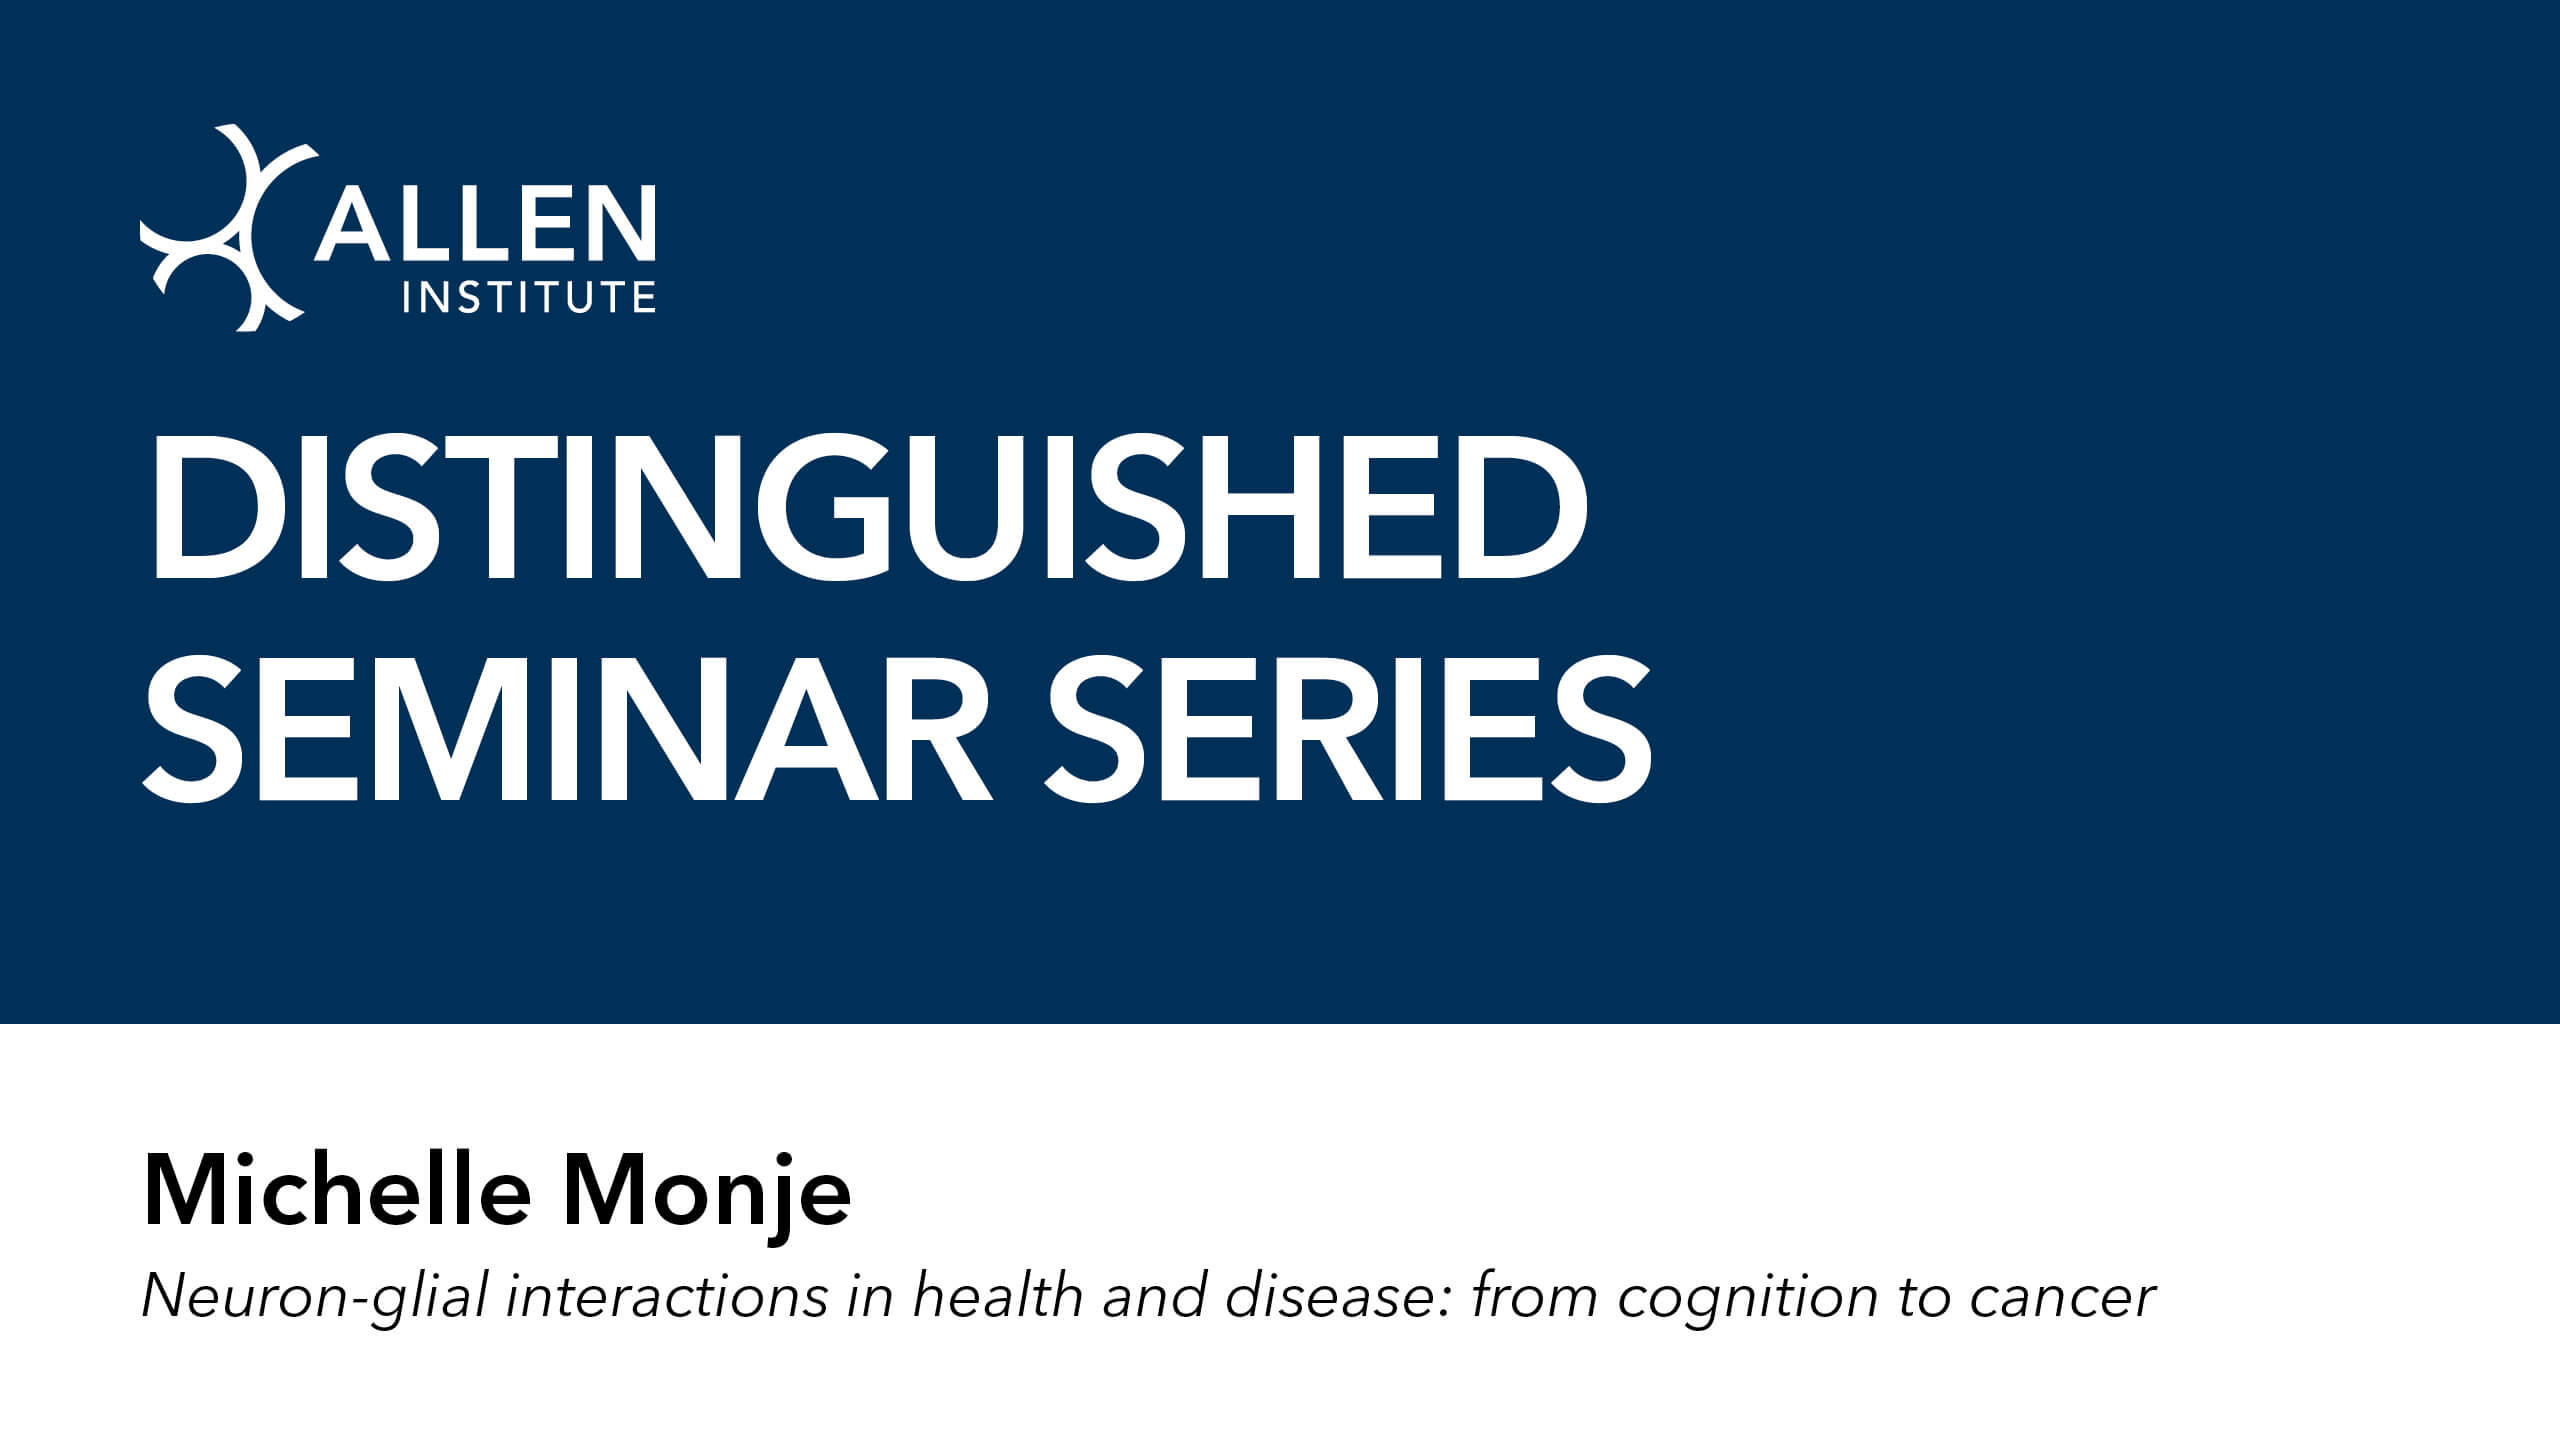 Graphic image with text that reads "Distinguished Seminar Series" "Michelle Monje: Neuron-glial interactions in health and disease: from cognition to cancer."